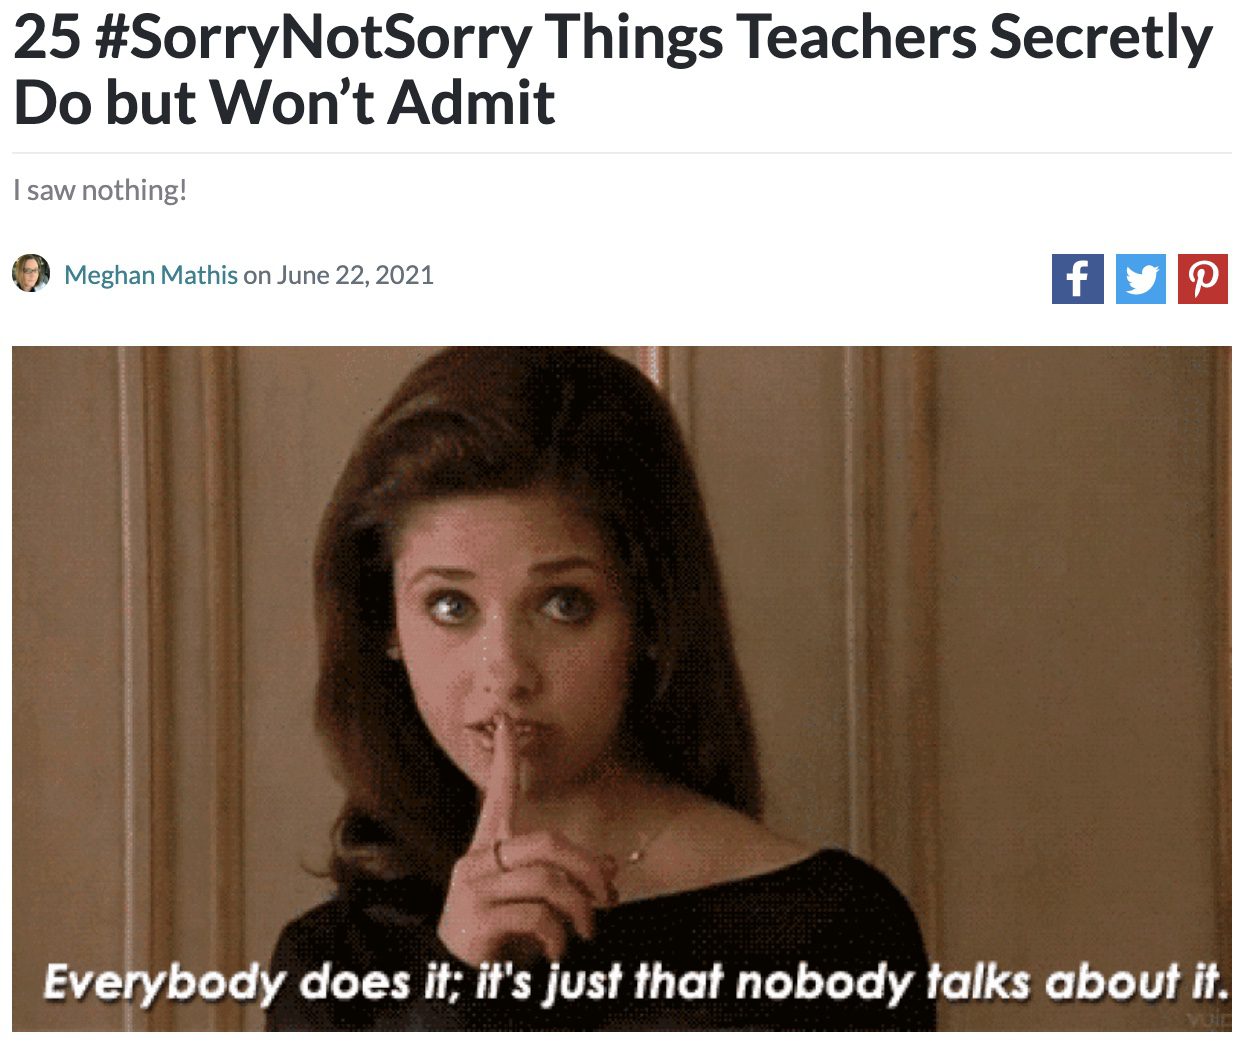 Screencap of an article about things teachers secretly do